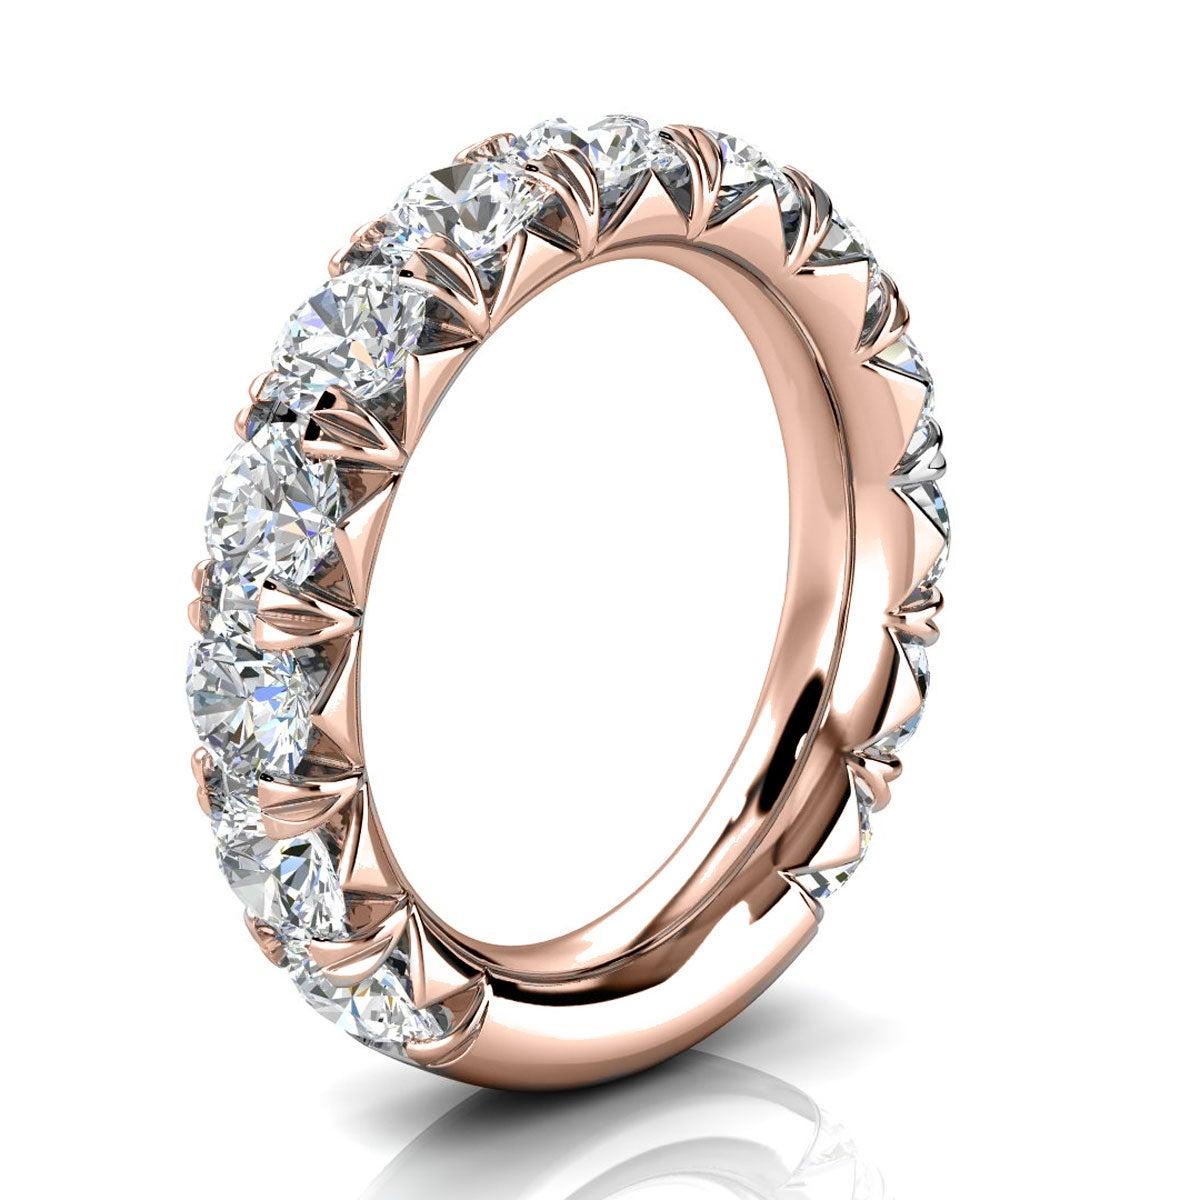 For Sale:  14k Rose Gold GIA French Pave Diamond Ring '3 Ct. Tw' 2